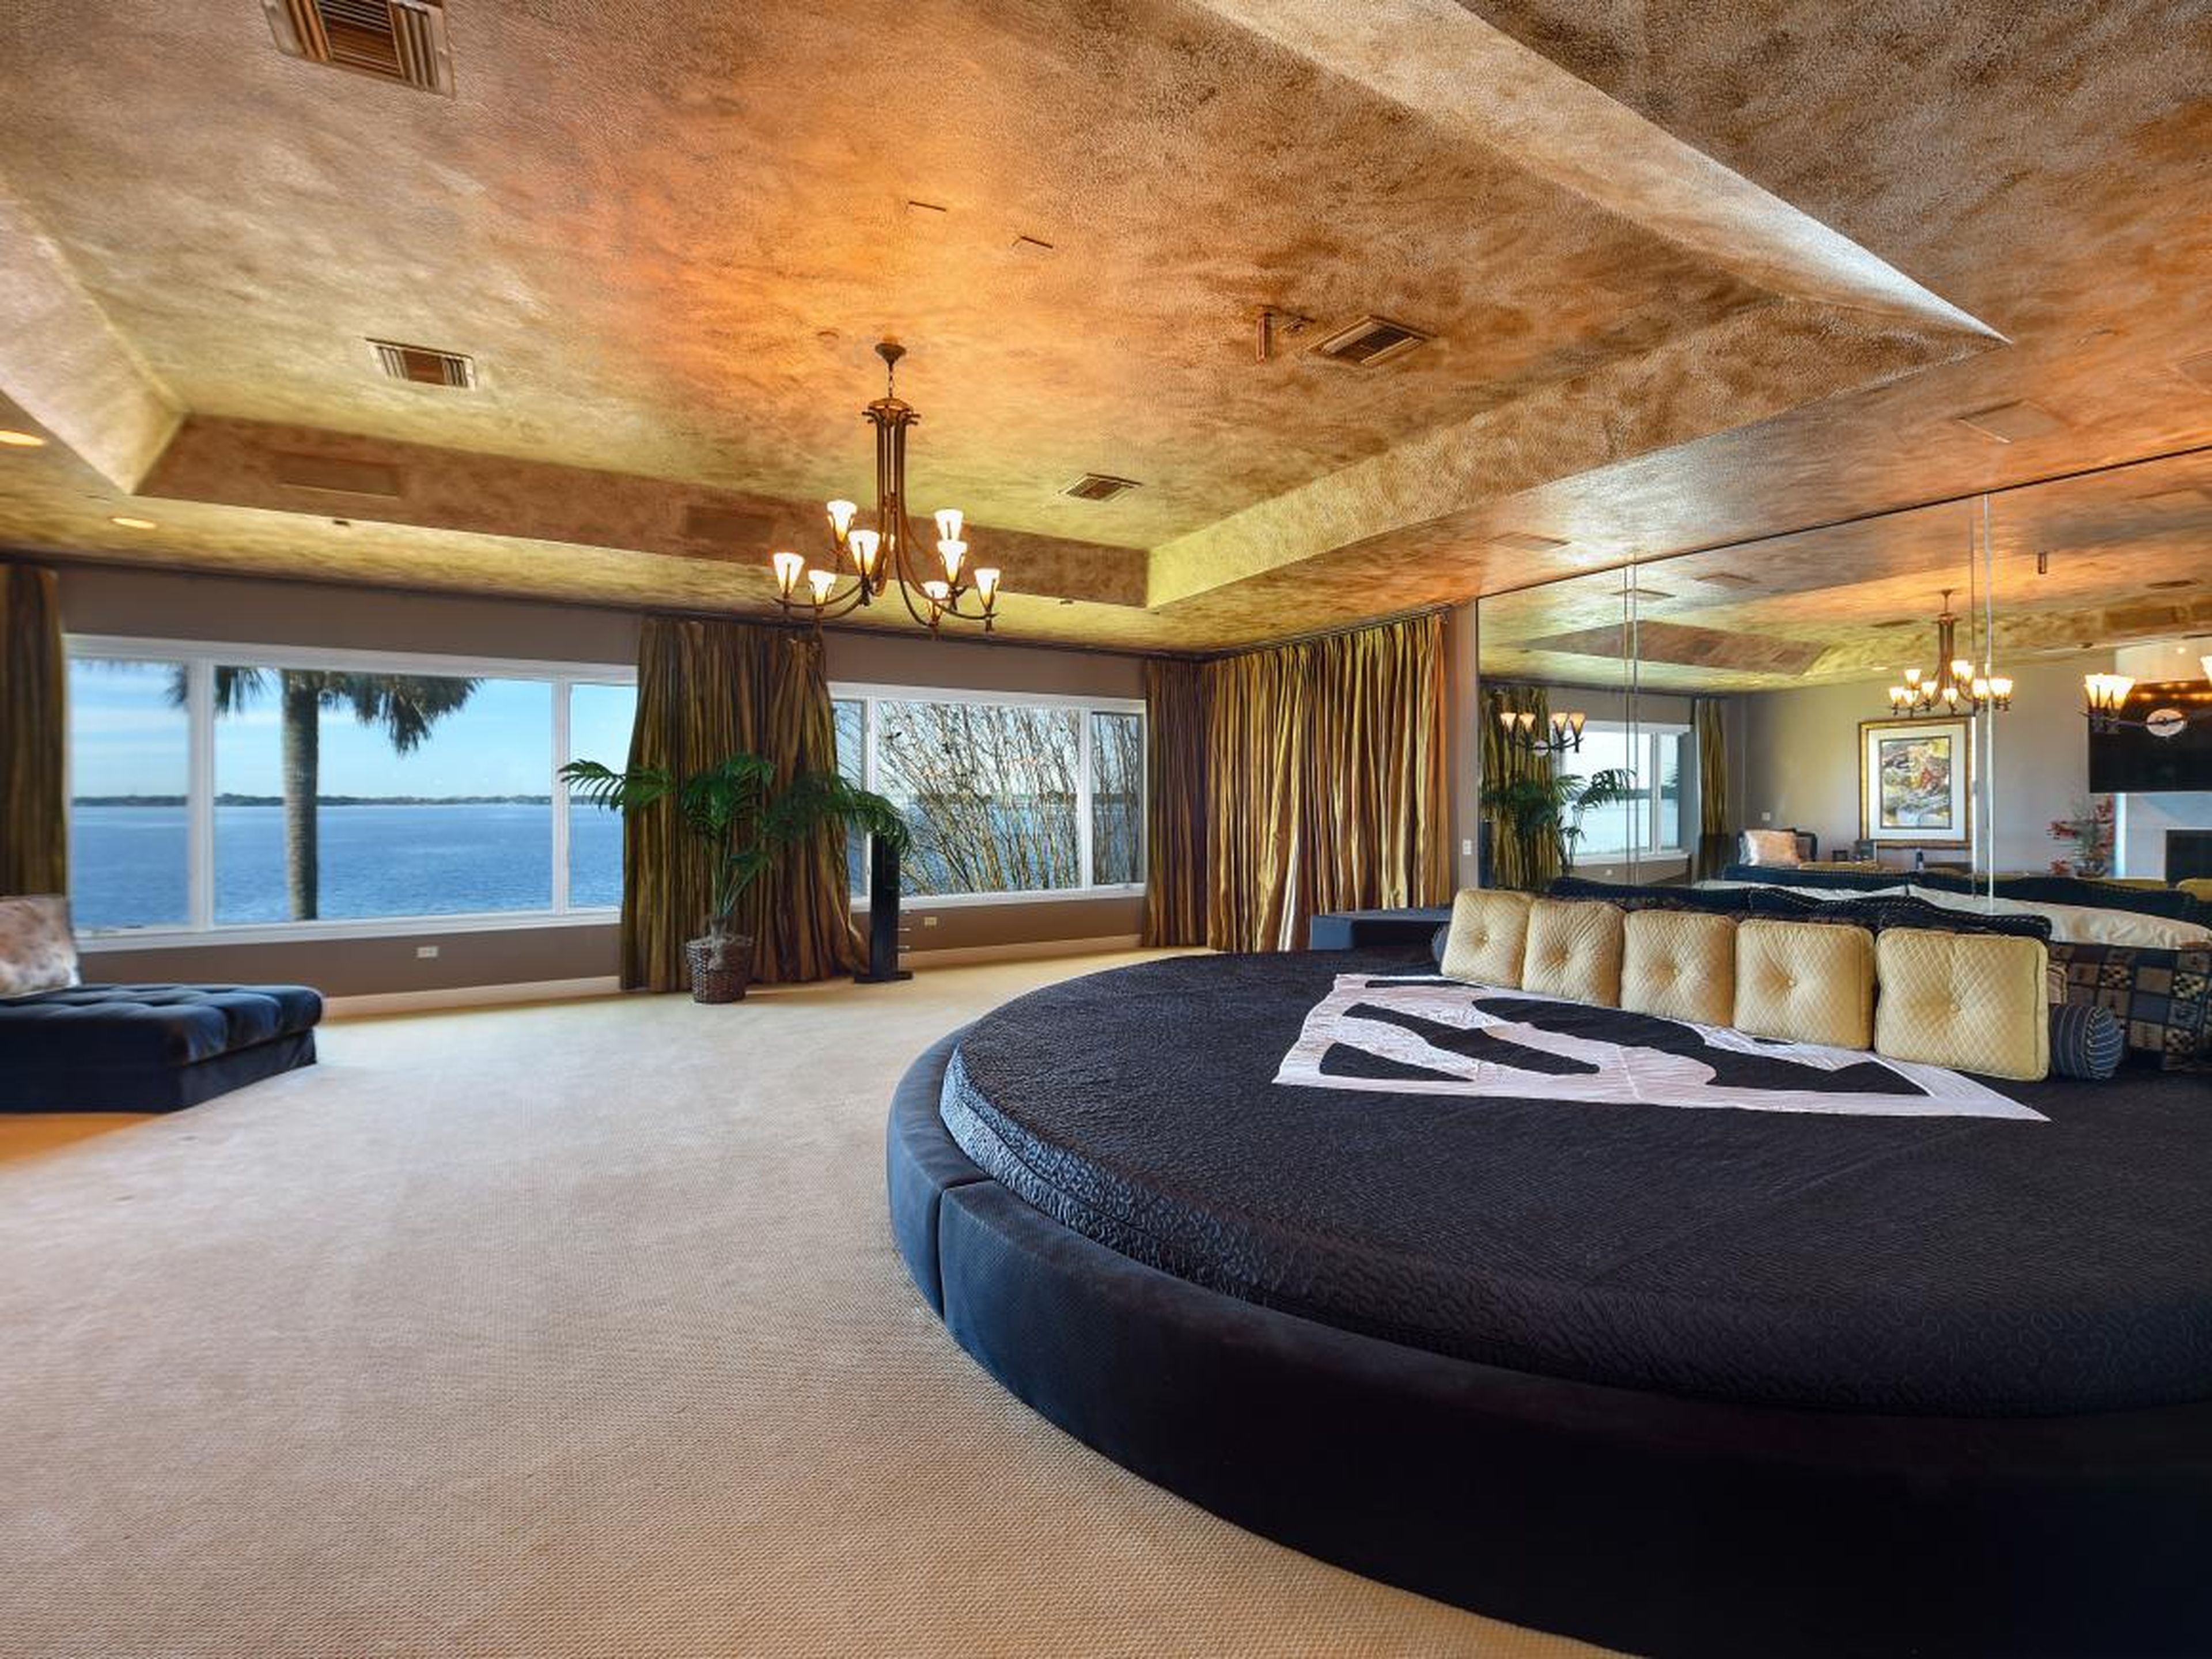 The master suite has a spacious walk-in closet, a mirrored wall, a gilded ceiling, and expansive views of the lake.